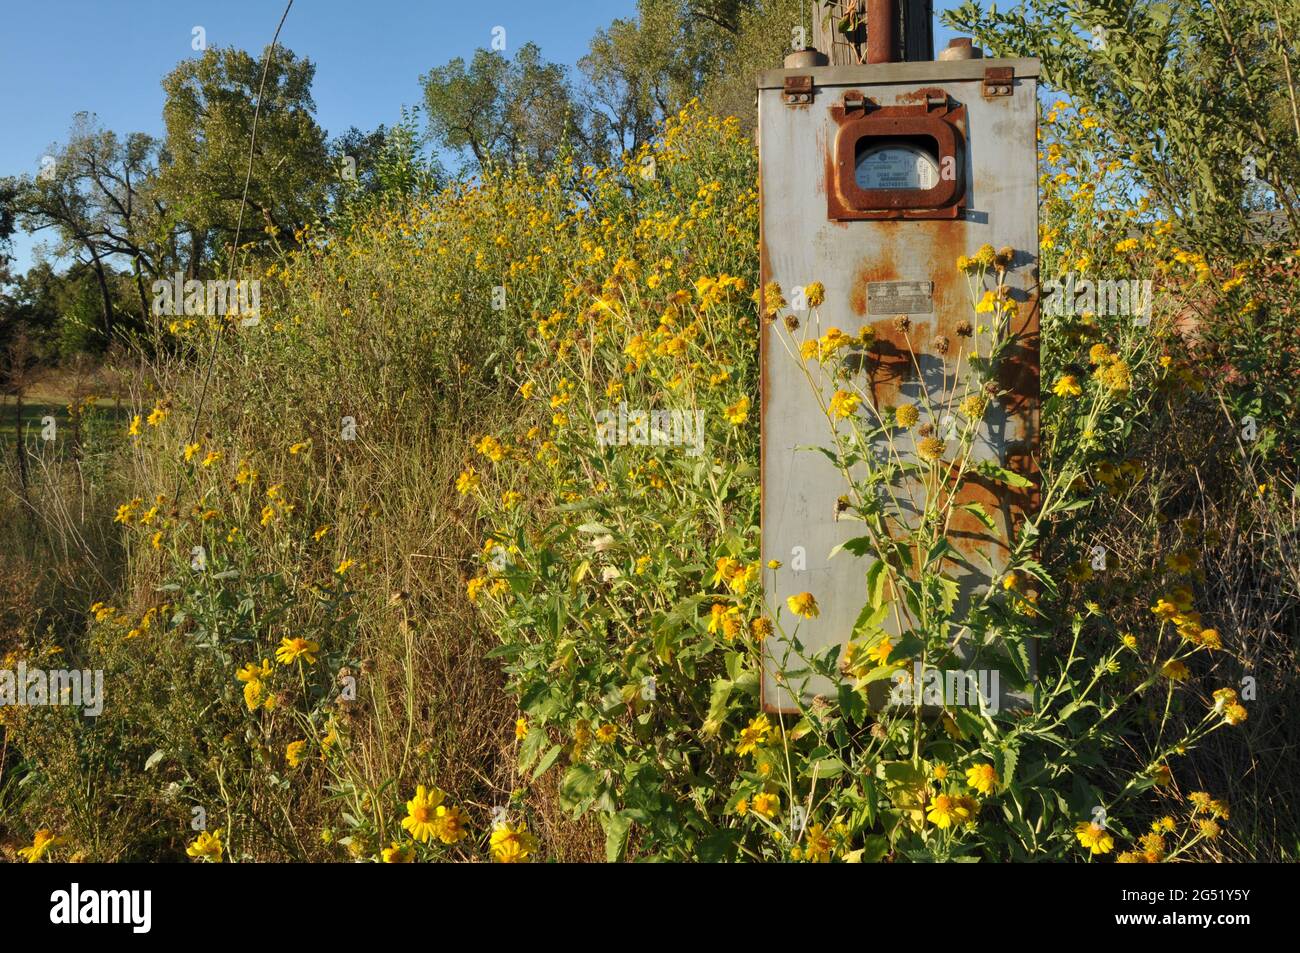 A rusting utility box is mounted on a pole at a commercial property in Warwick, Oklahoma. Stock Photo